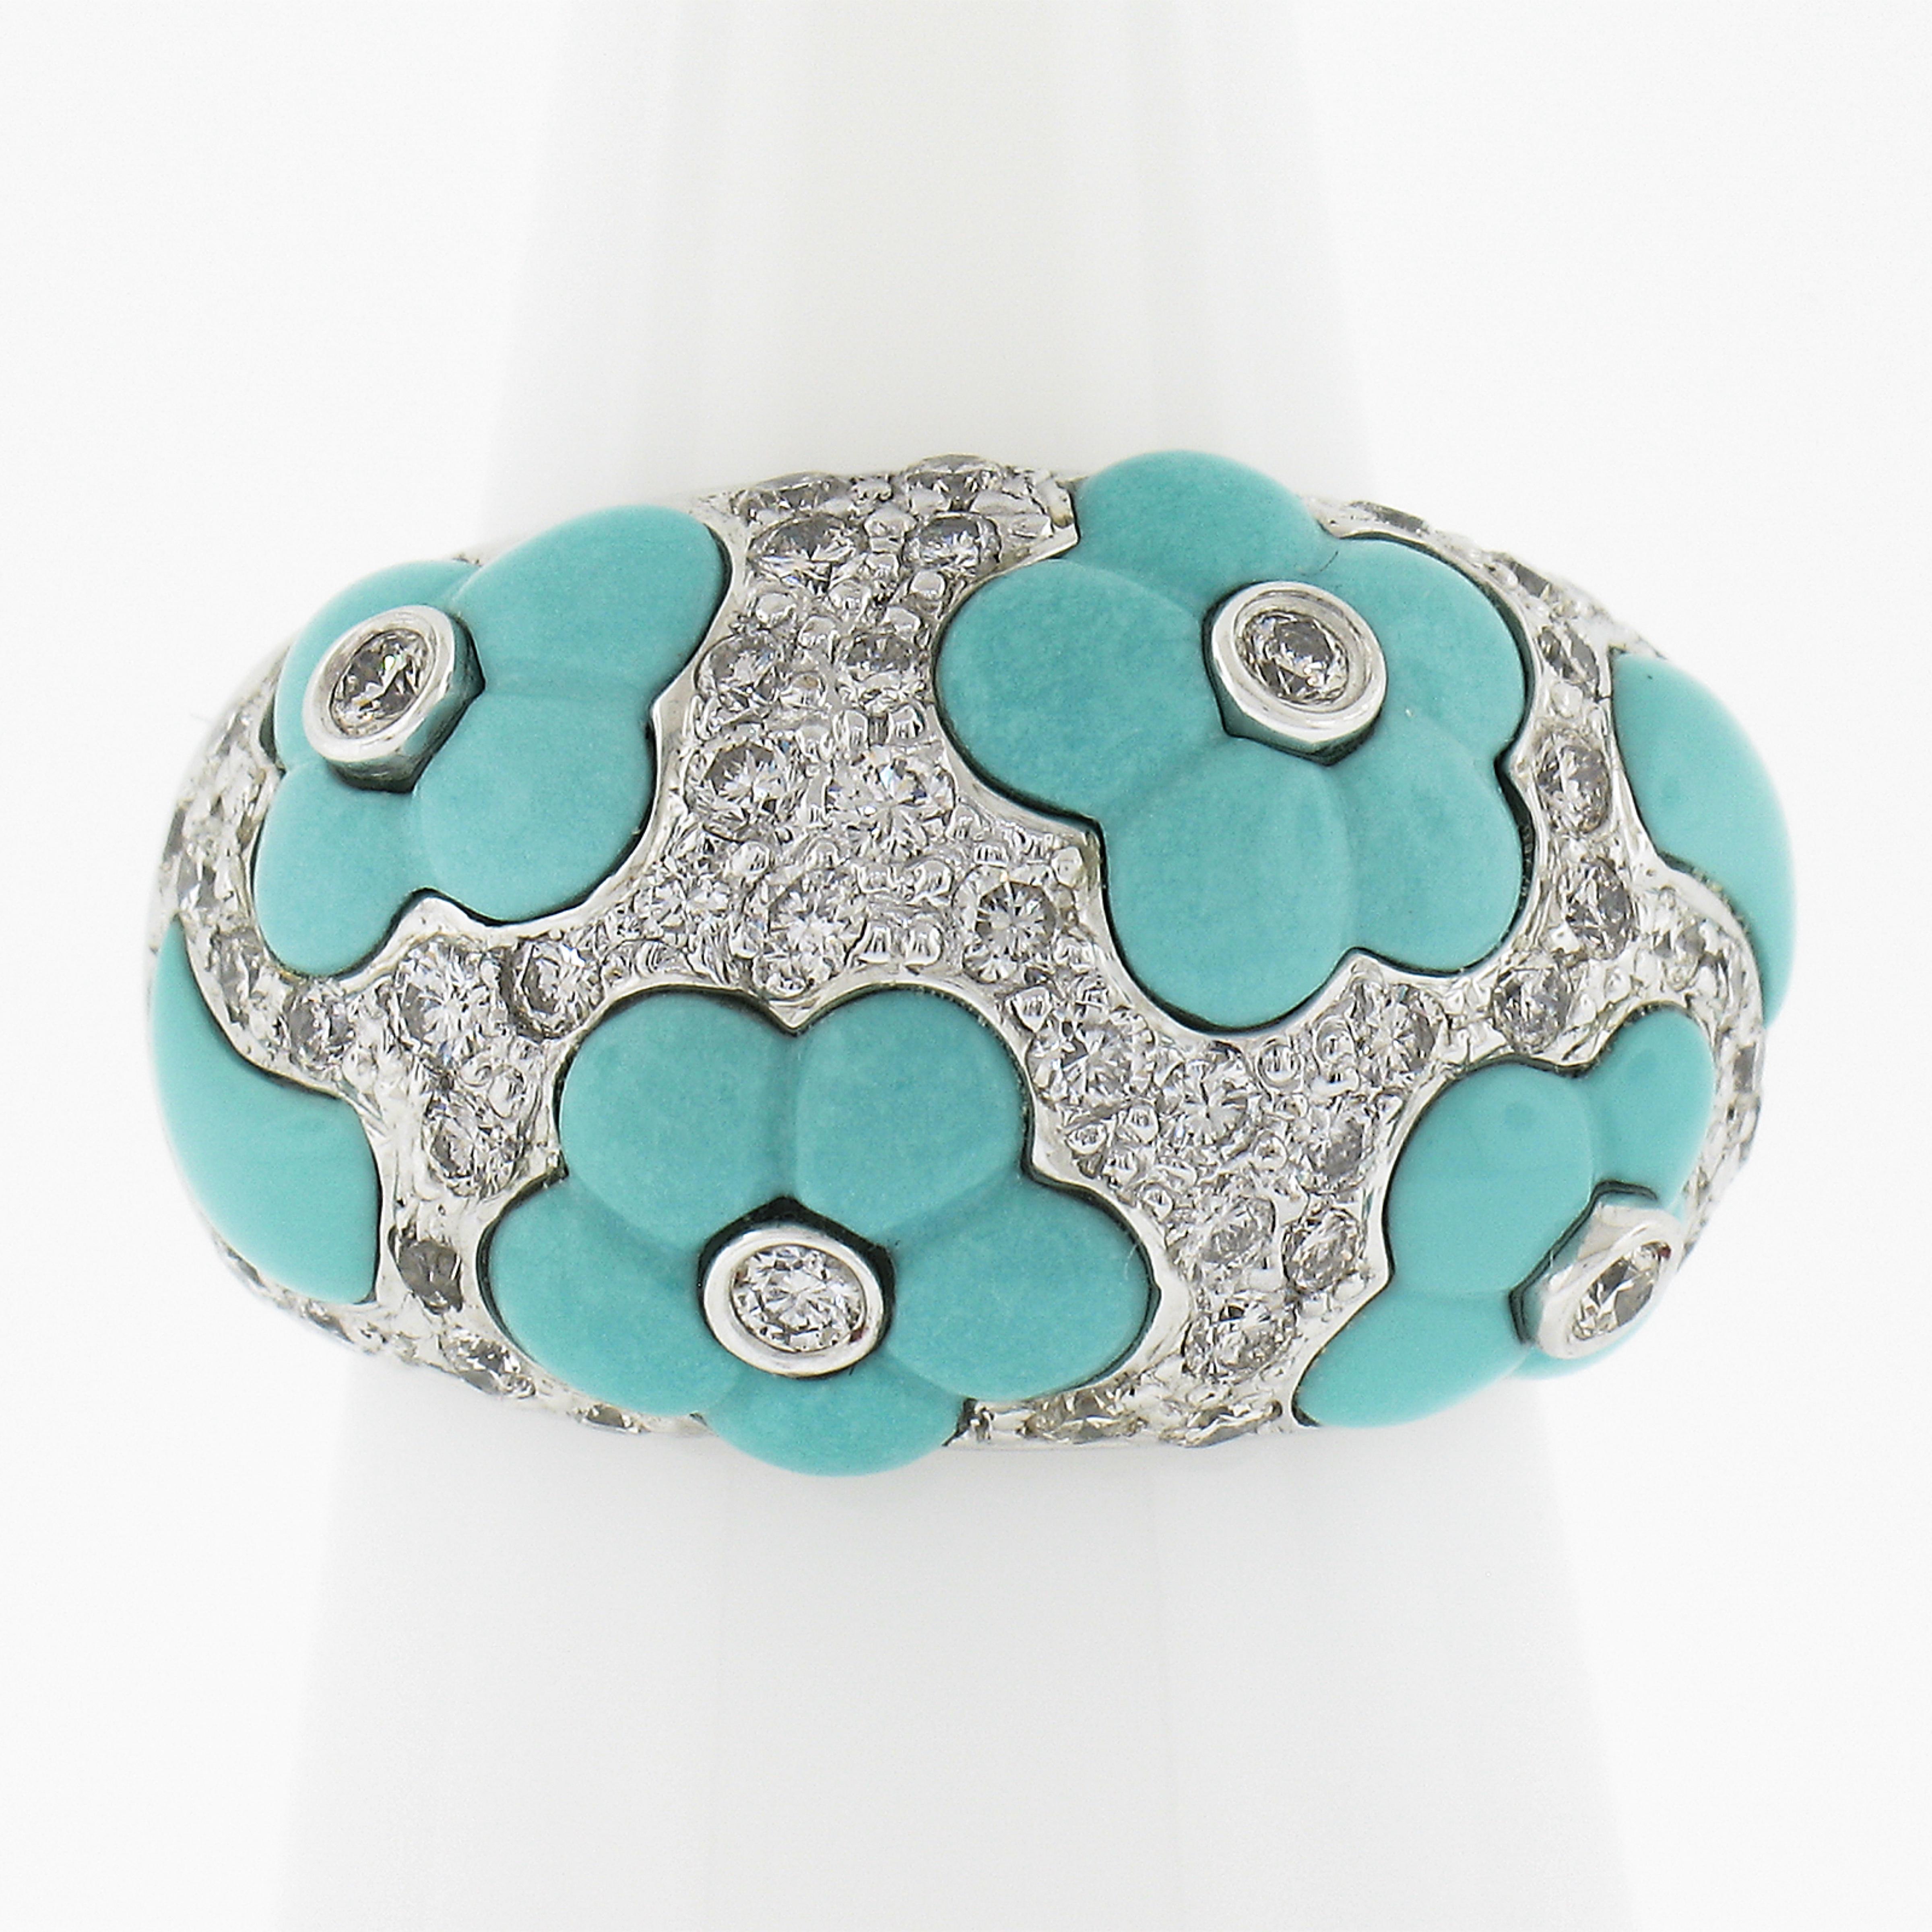 --Stone(s):--
(6) Natural Genuine Turquoise - Flower Custom Cut - Inlaid Set - Turquoise Color 
Numerous Natural Genuine Diamonds - Round Brilliant Cut - Pave Set - G-I Color - VS2-SI2 Clarity - 1.07ctw (exact)

Material: Solid 18K White